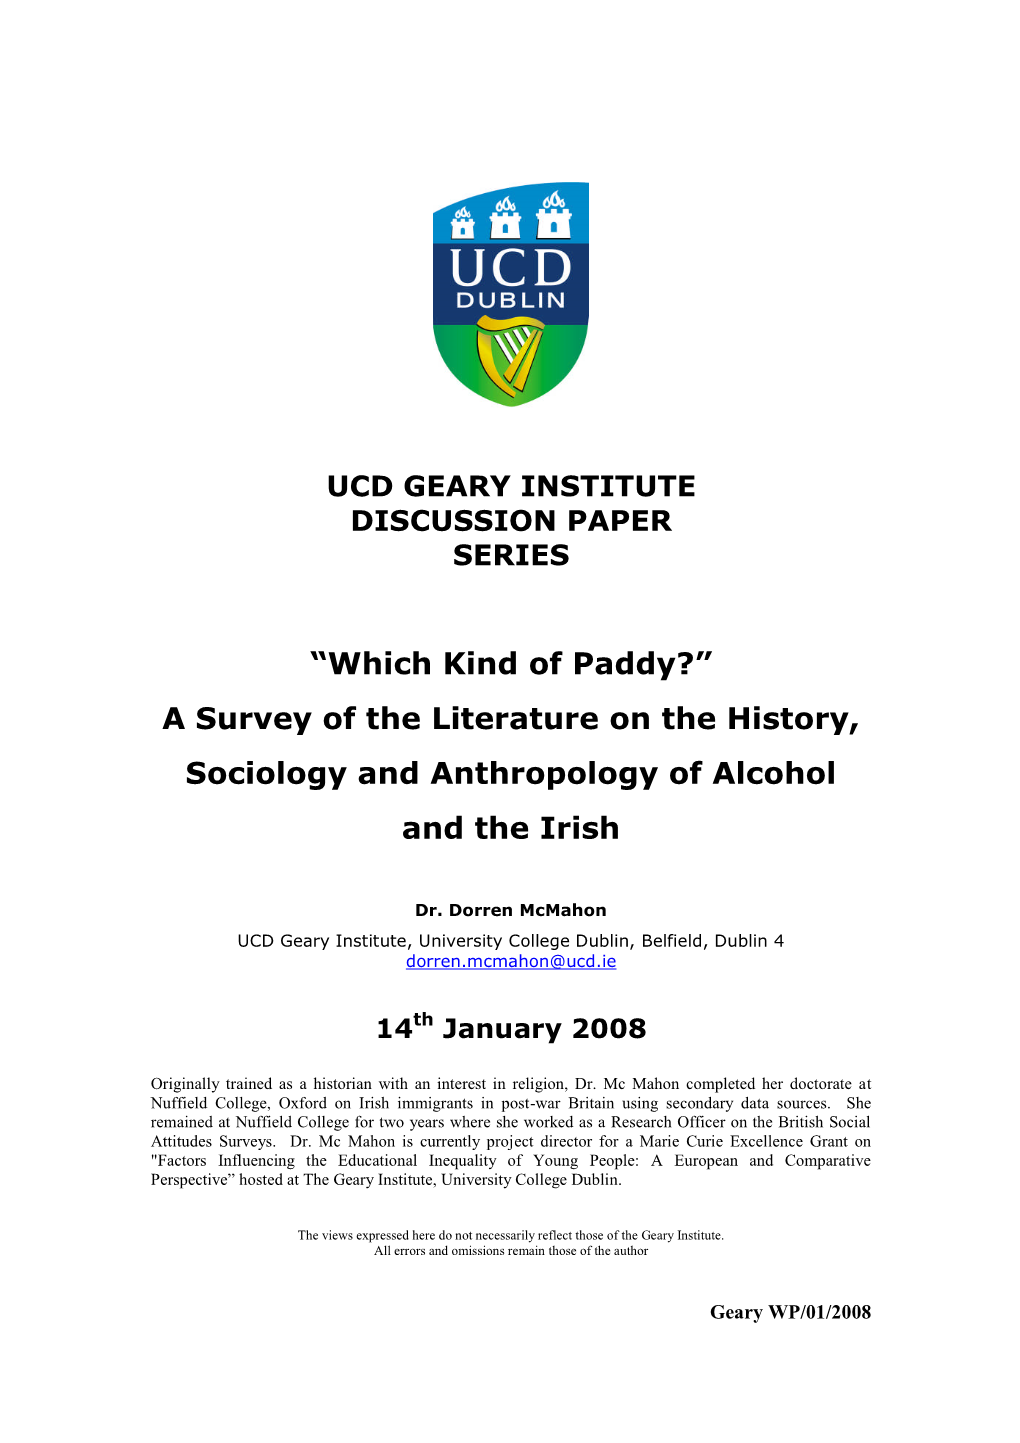 A Survey of the Literature on the History, Sociology and Anthropology of Alcohol and the Irish